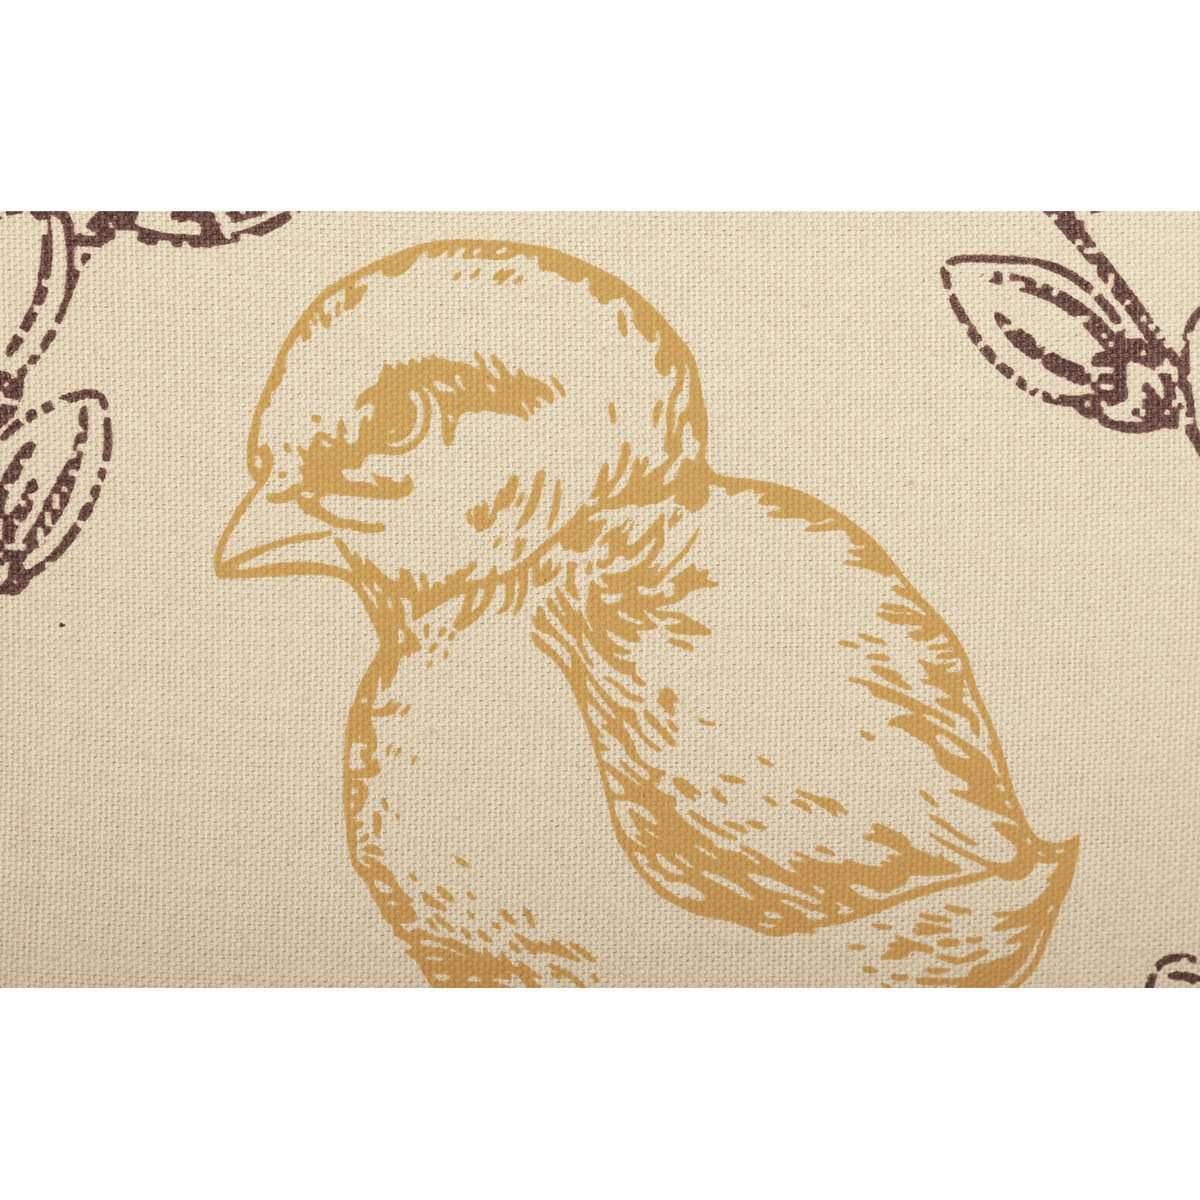 Sawyer Mill Easter on the Farm Chick Pillow 18x18 VHC Brands zoom